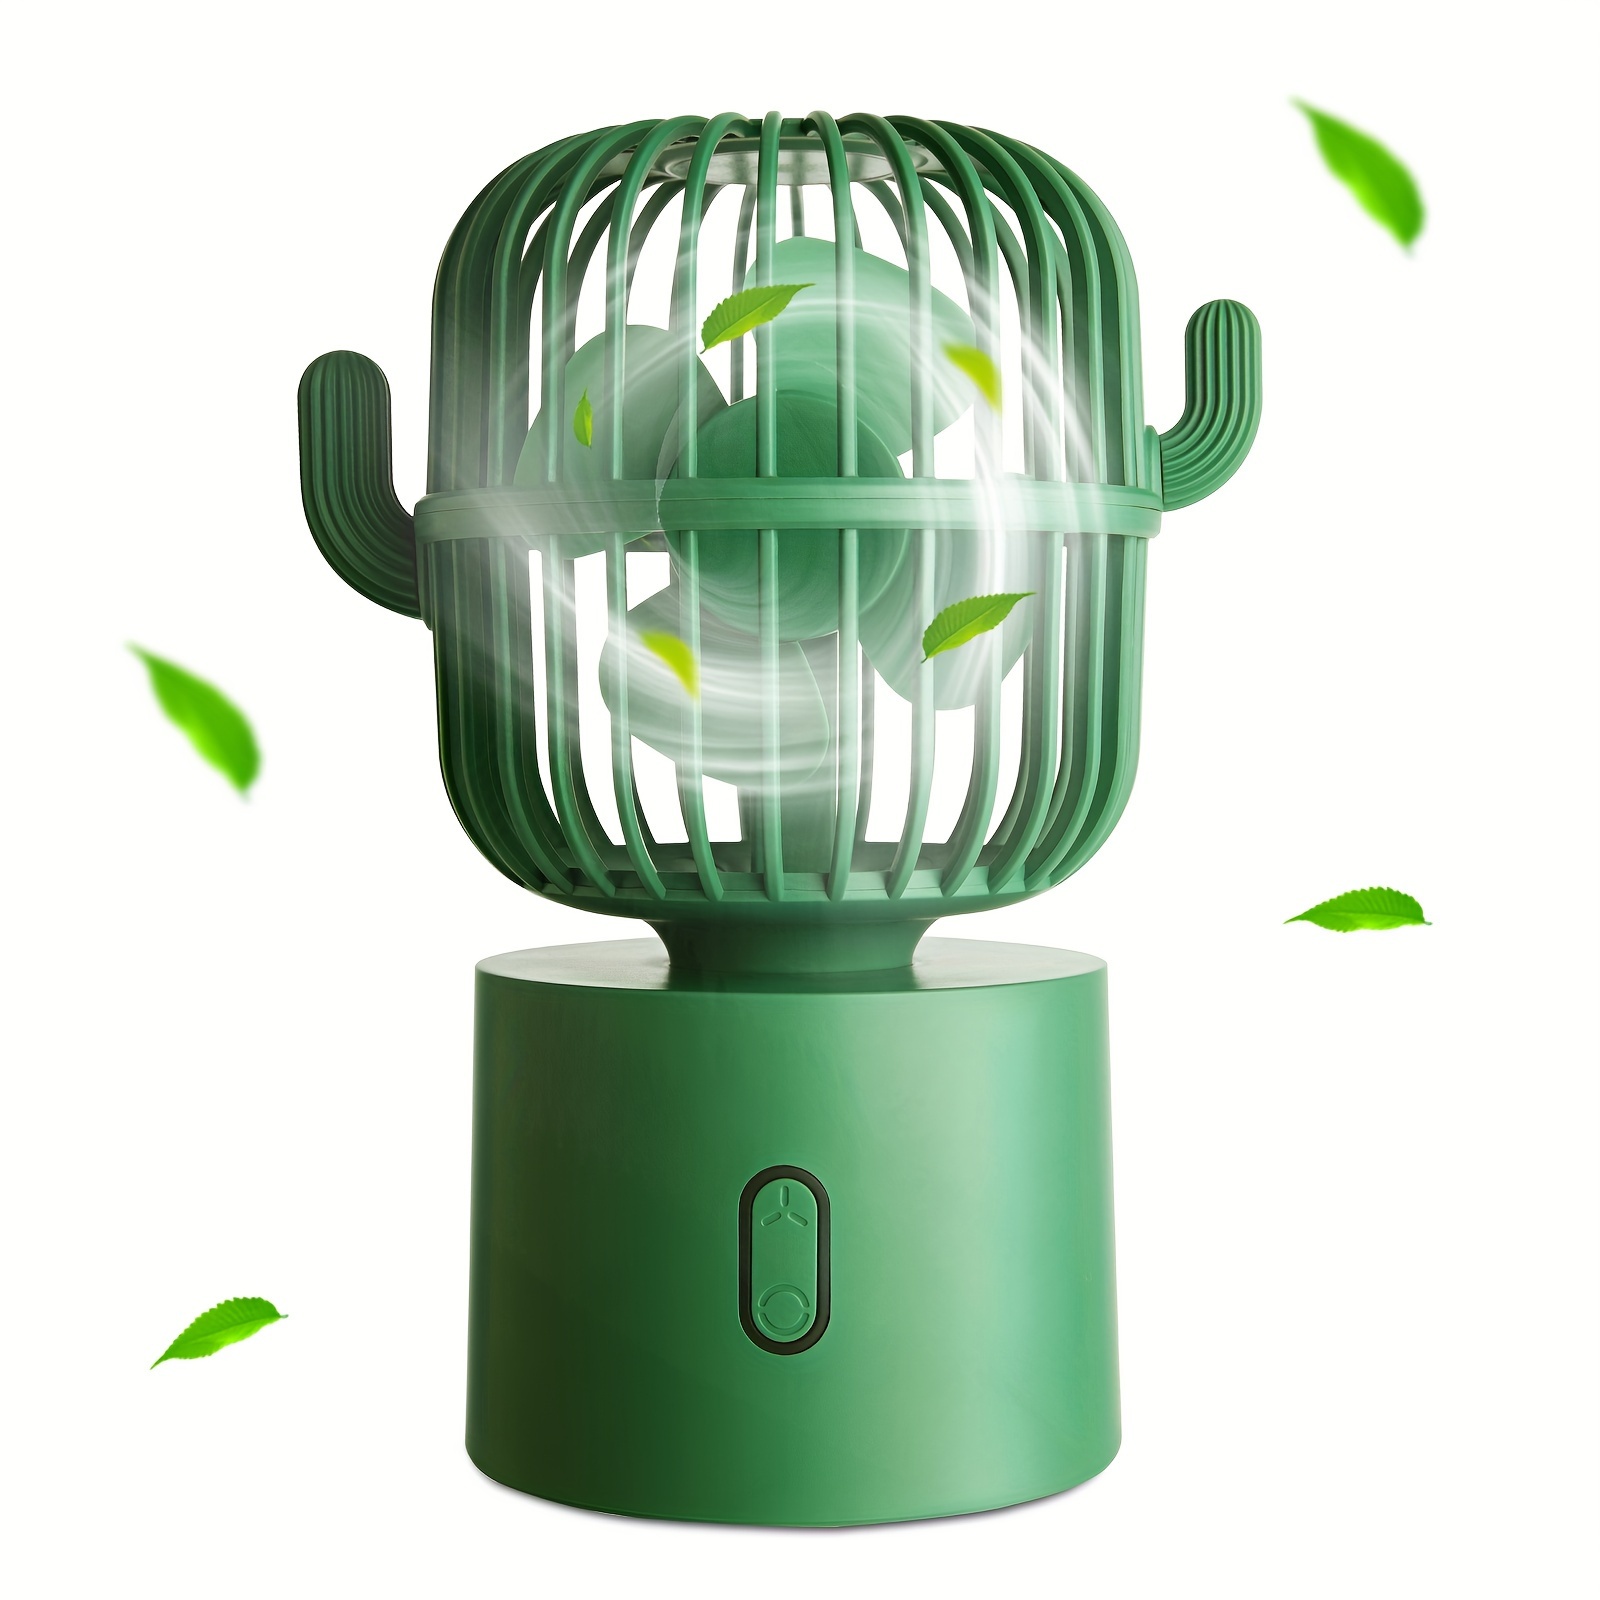 

1 Pc, Cactus Design Portable Usb Desk Fan, Quiet Operation Fan For Home And Student Use, High-quality Silent Fan With Usb Charging, Green And Pink Options